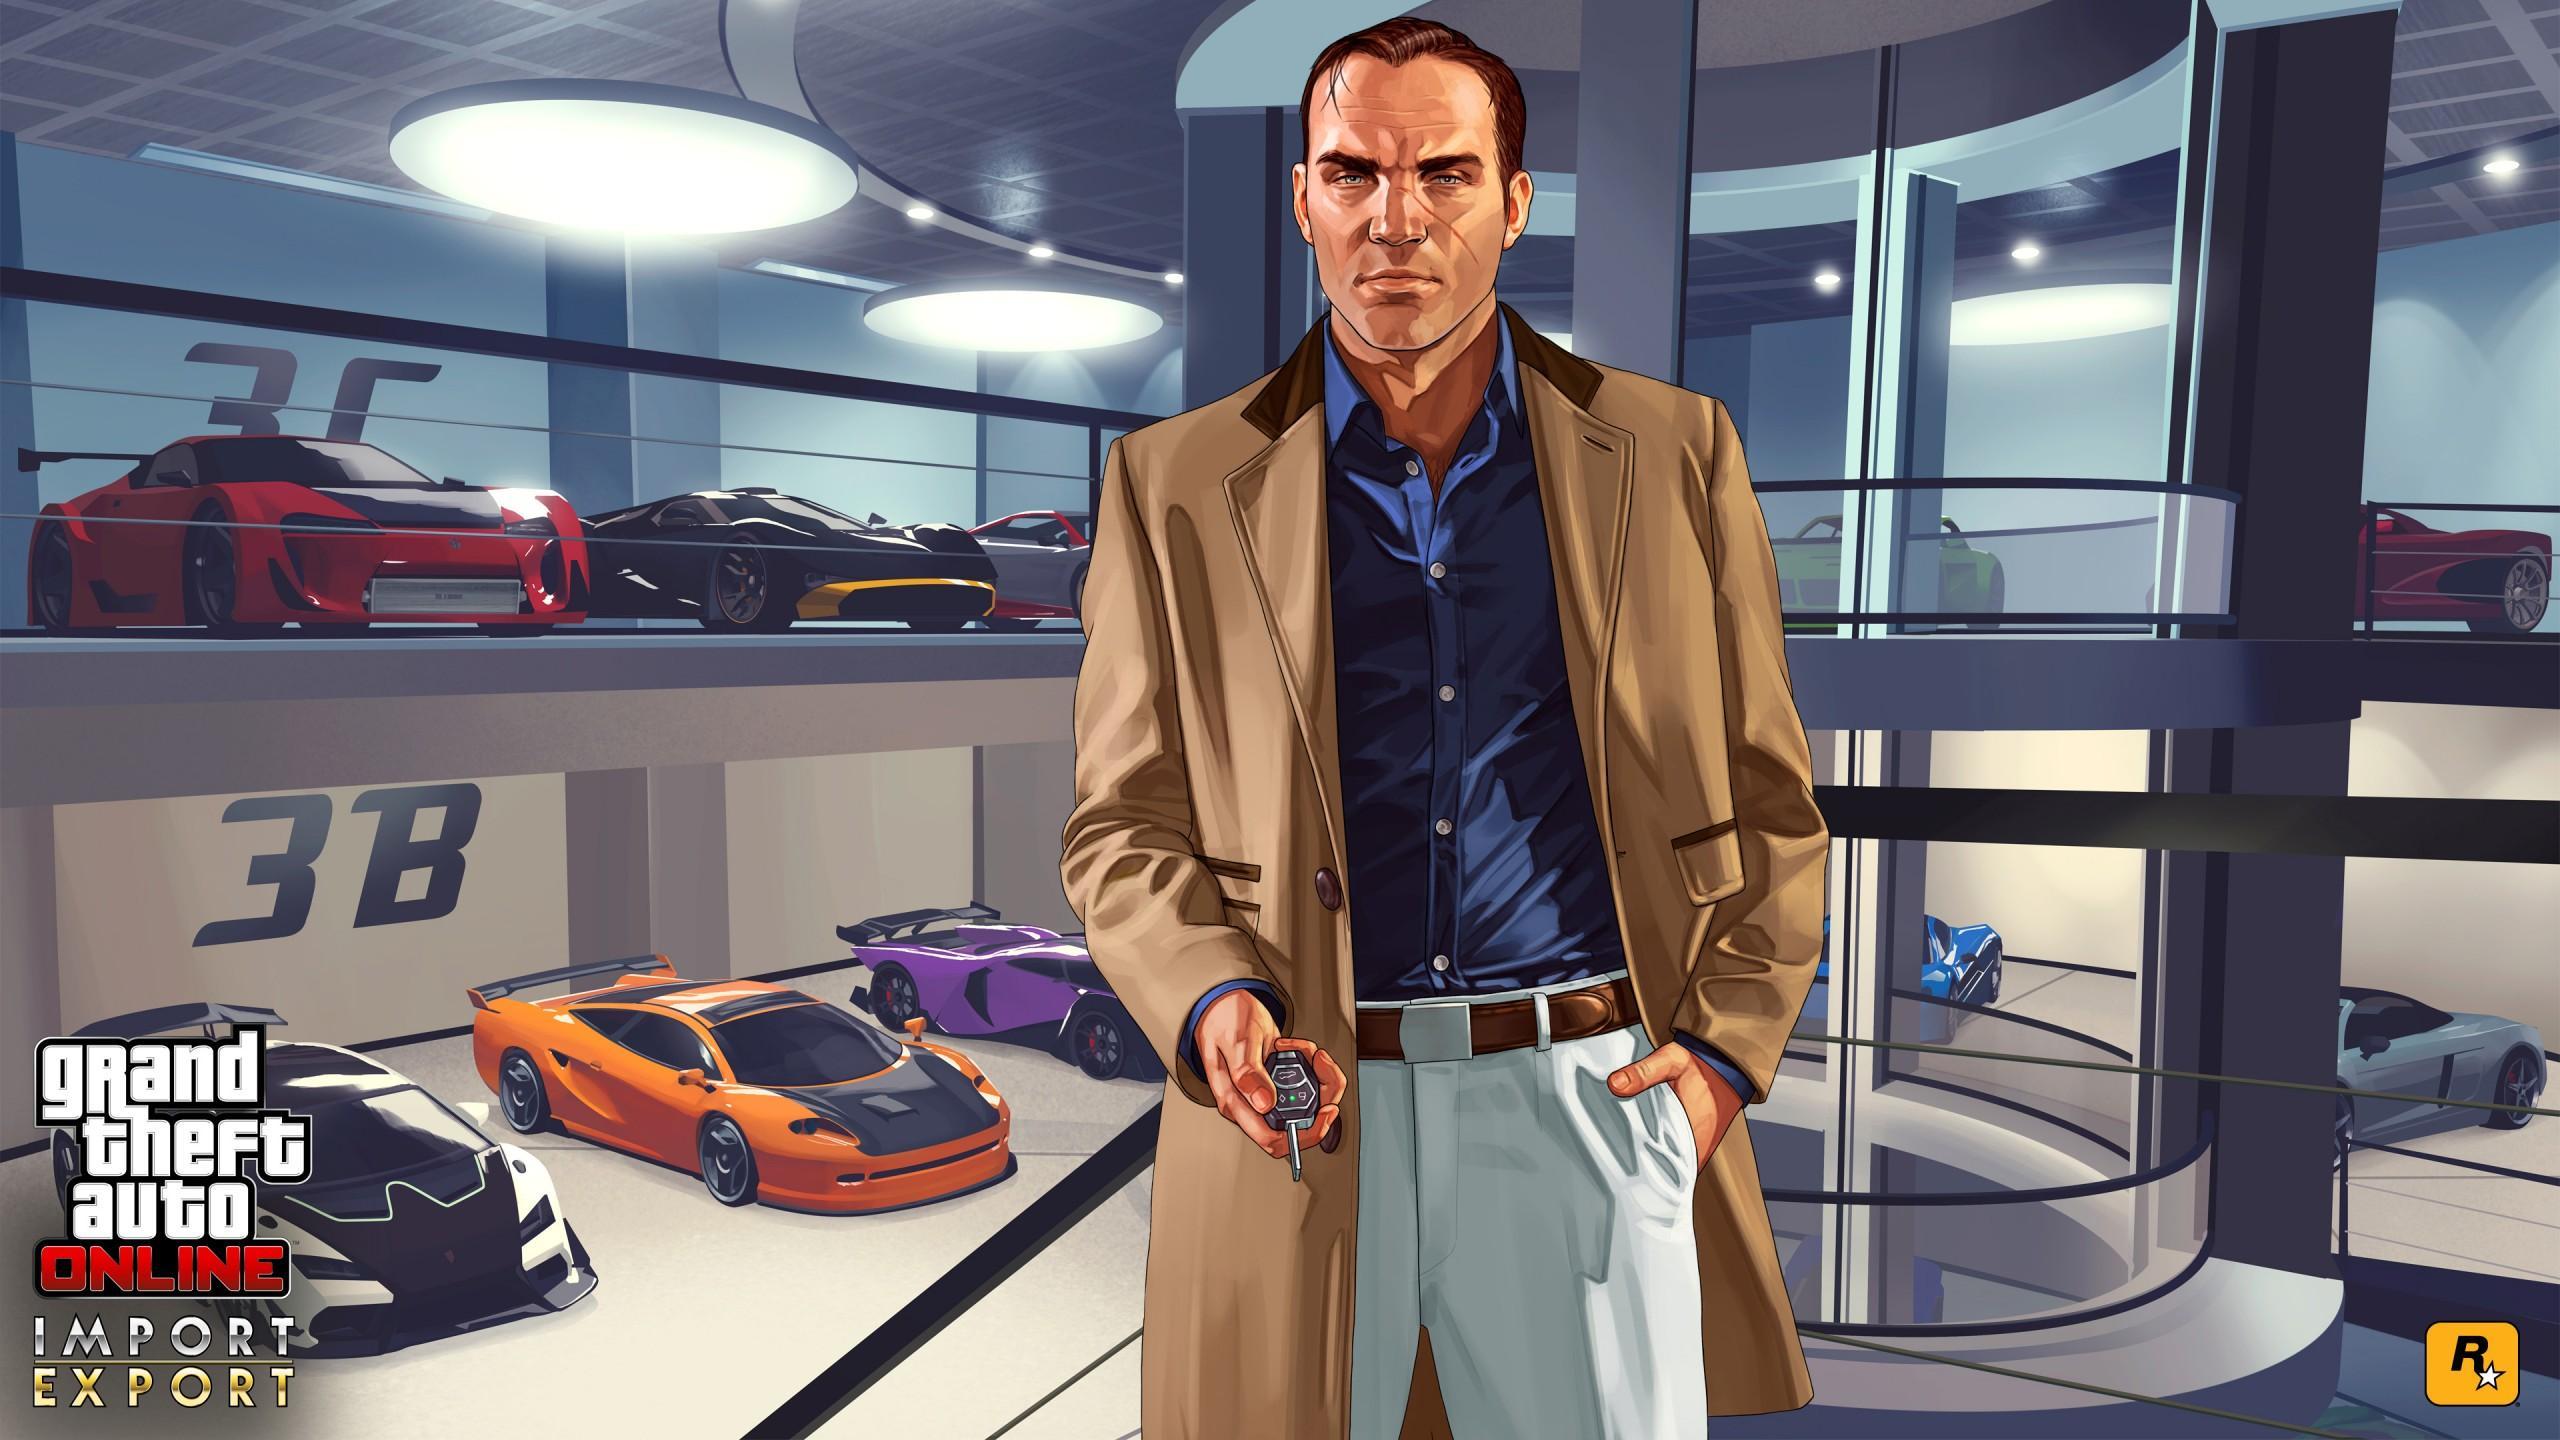 GTA 5's 1.64 Patch Notes Are Ginormous for PS5, PS4